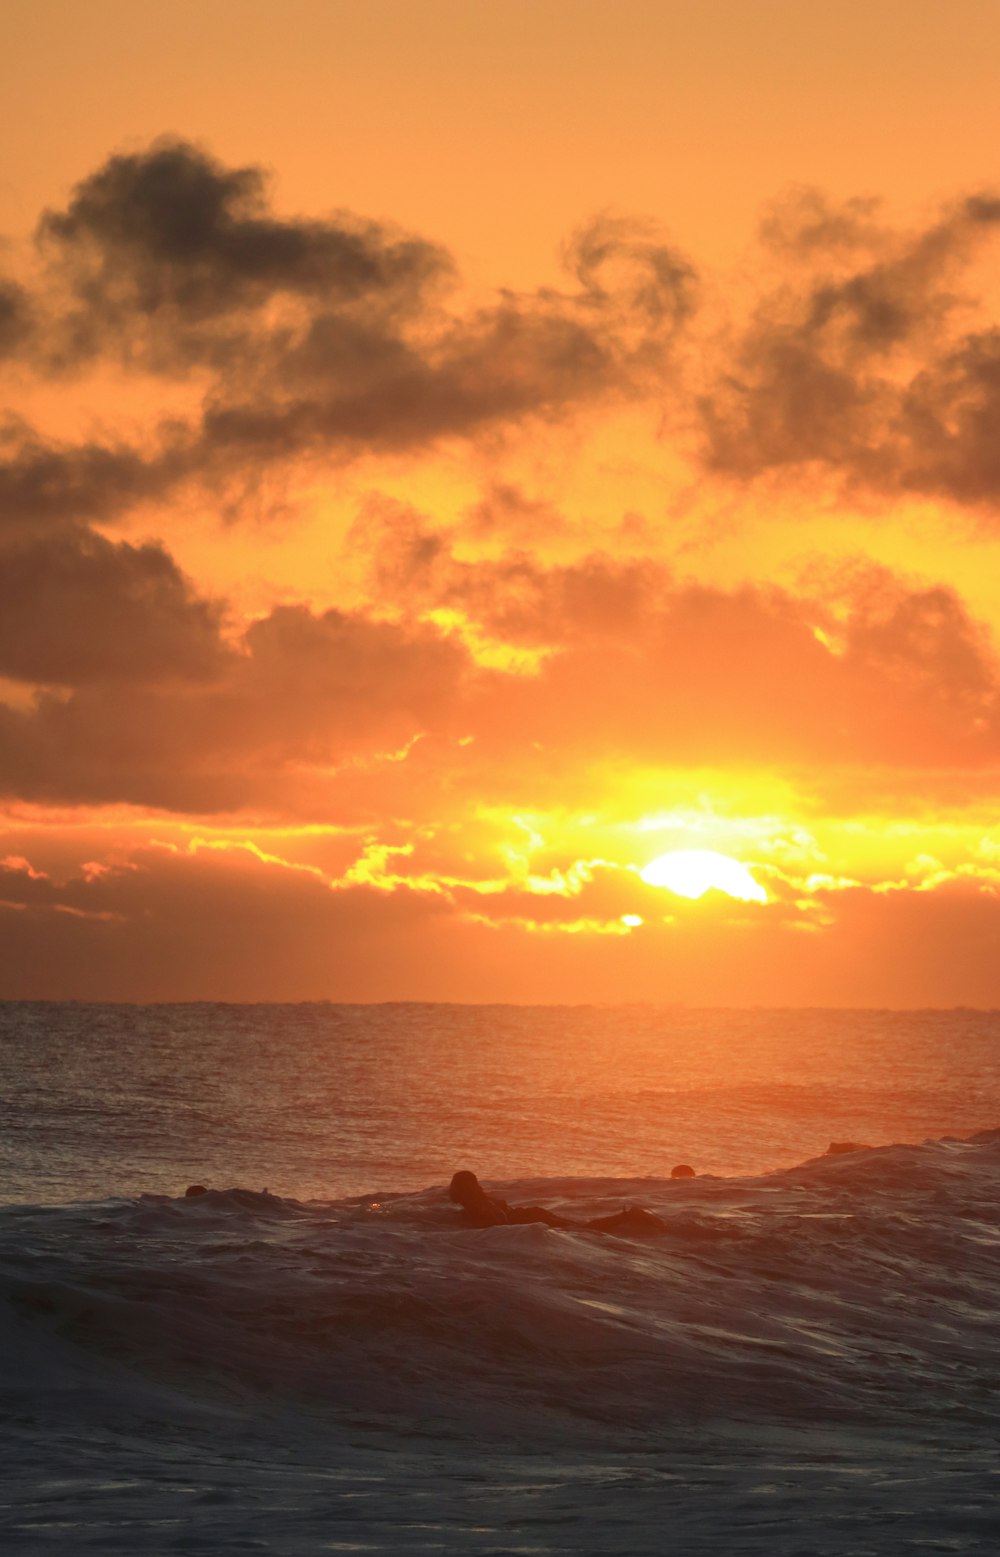 the sun is setting over the ocean with surfers in the water